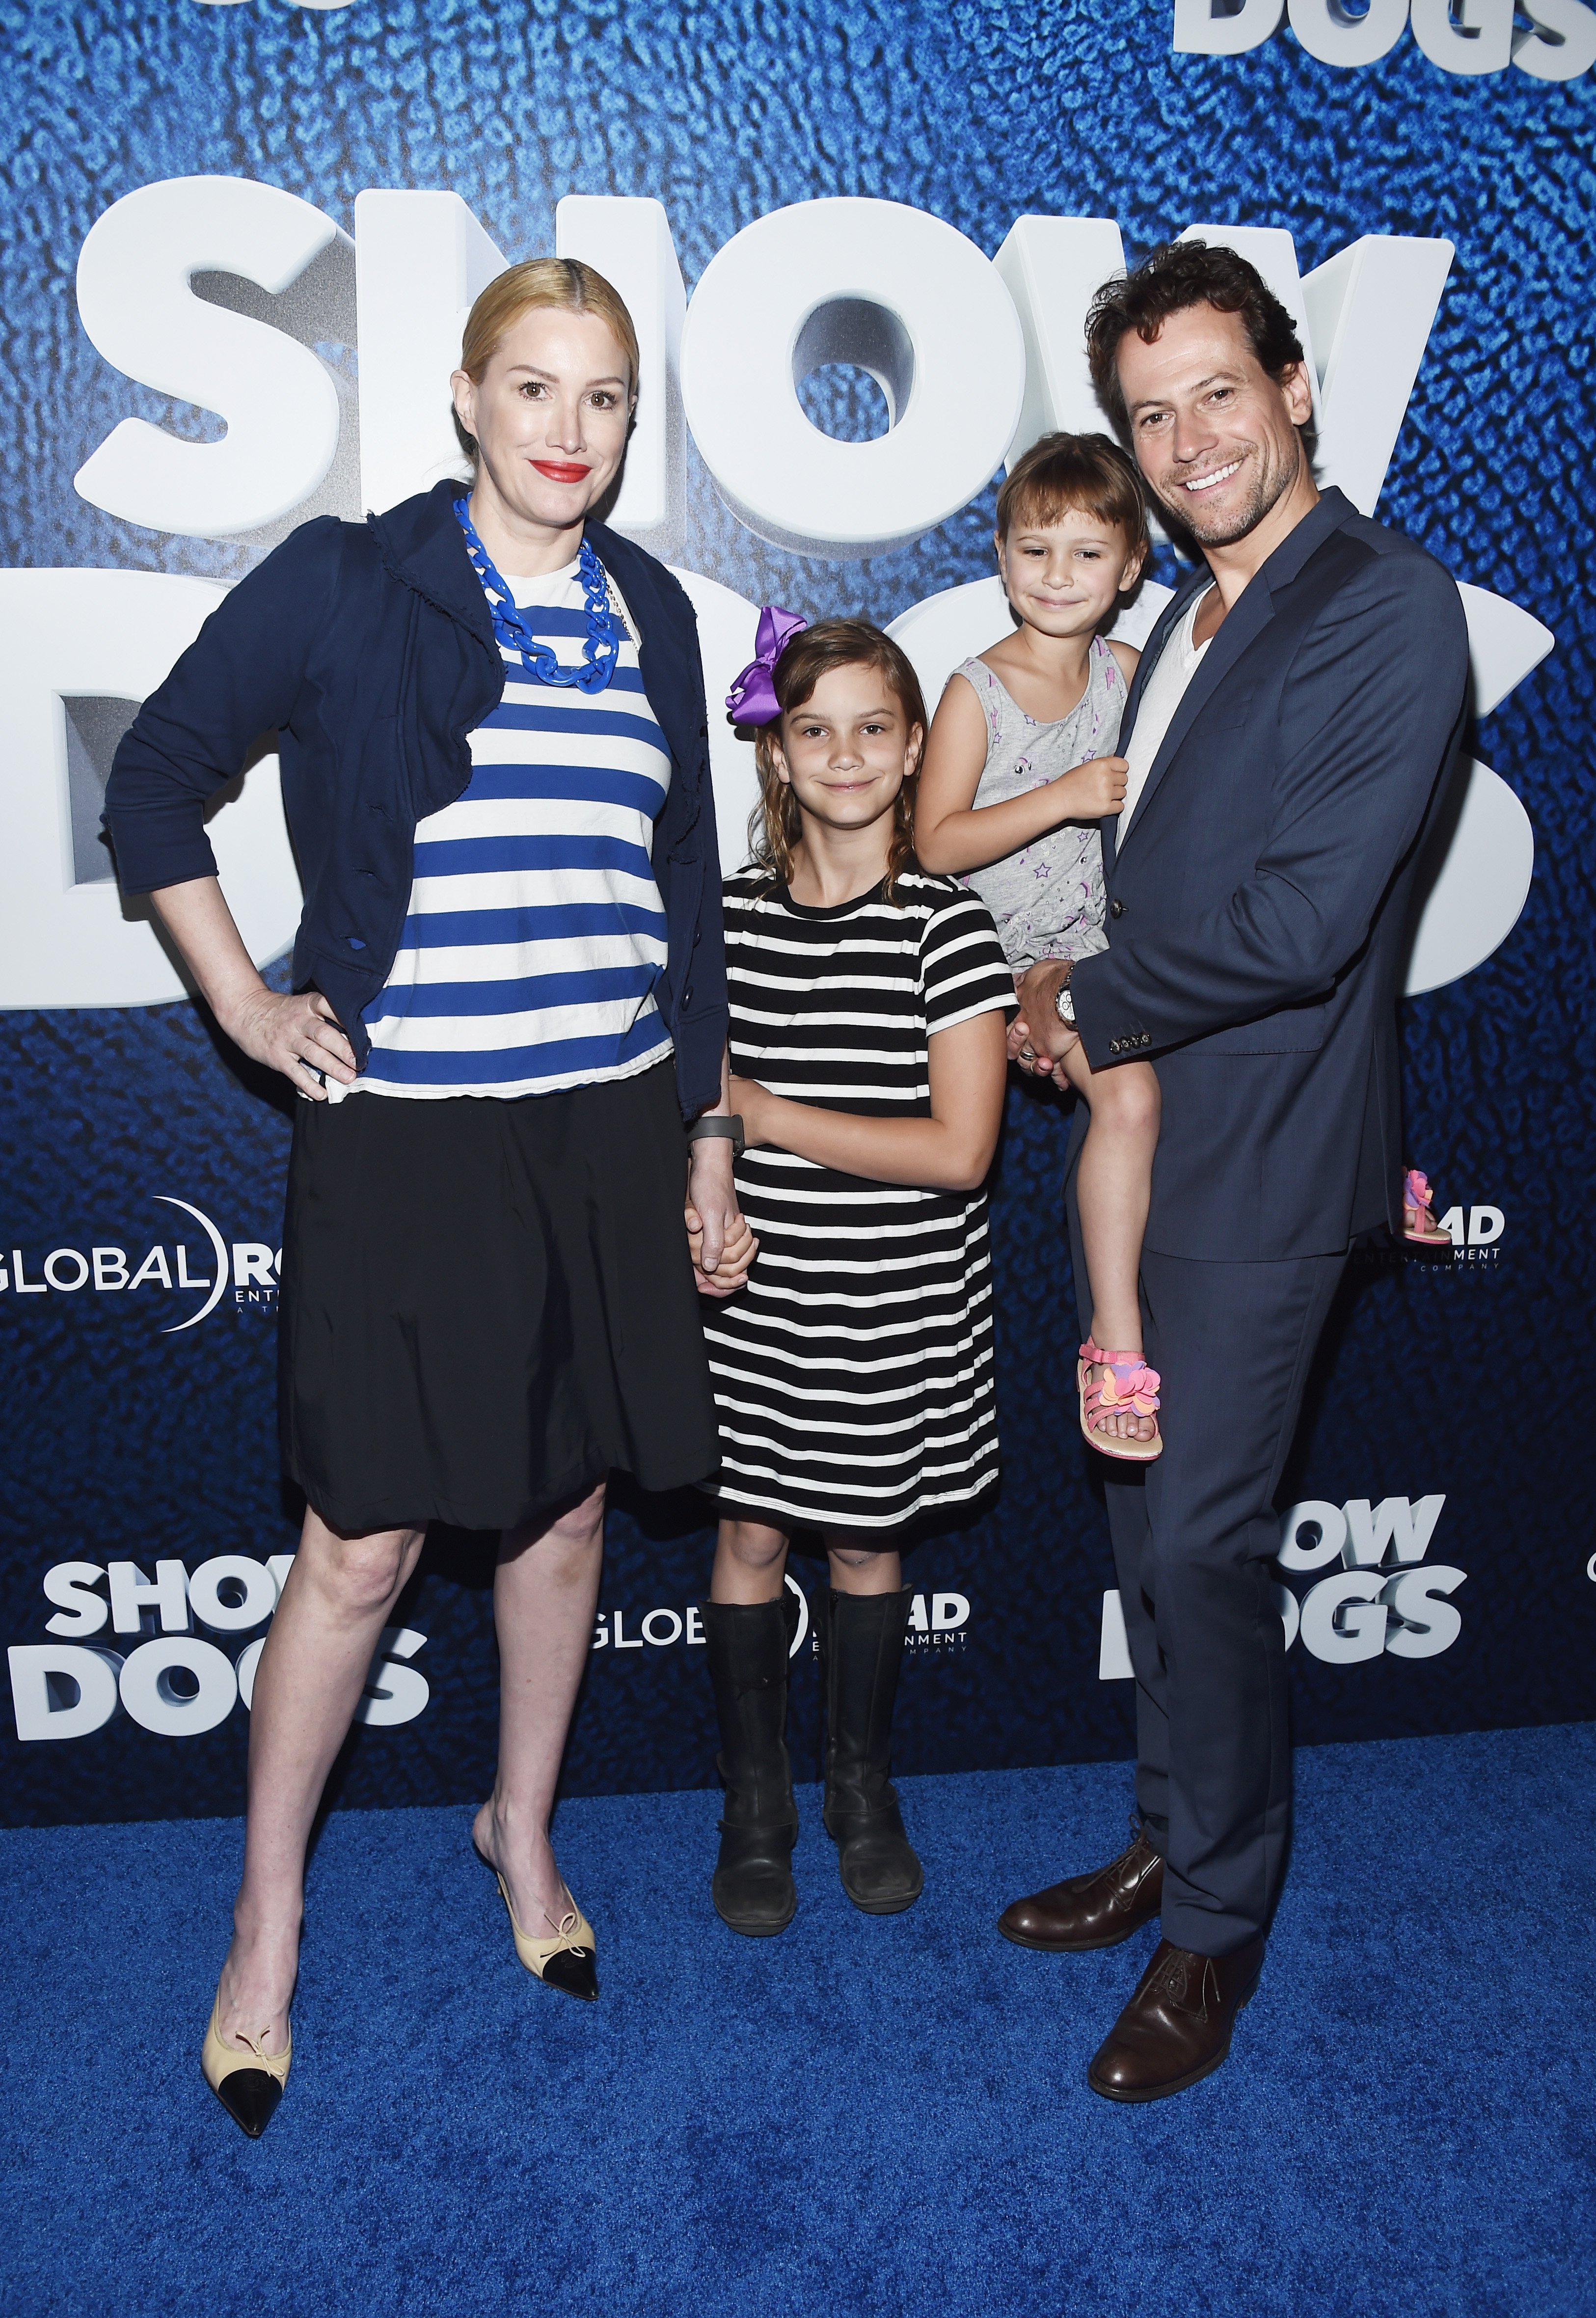 Ioan Gruffudd and Alice Evans with their daughters Ella and Elsie at the LA premiere of Show Dogs in 2018.